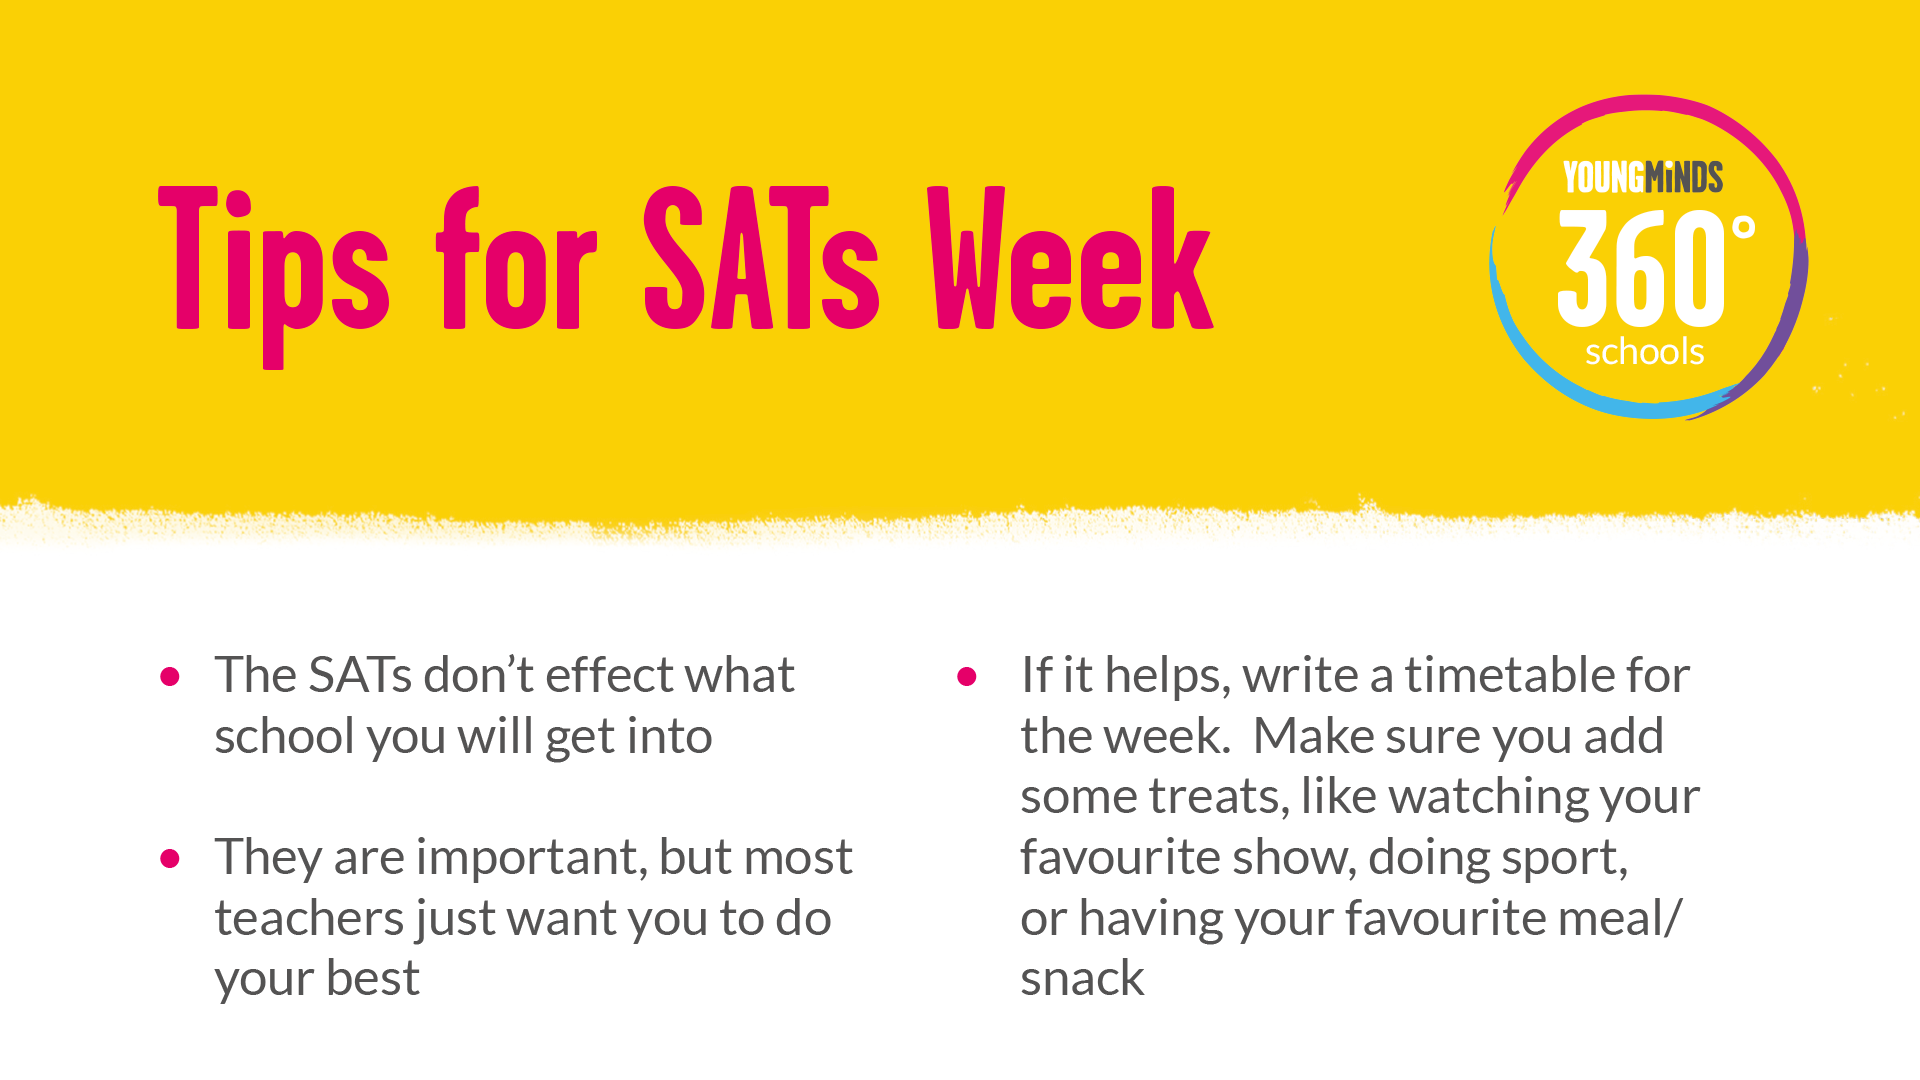 An image of our 'Tips for SATs week' poster. The title at the top of the poster reads 'tips for SATs week'. Next to the title is our 360 schools logo.